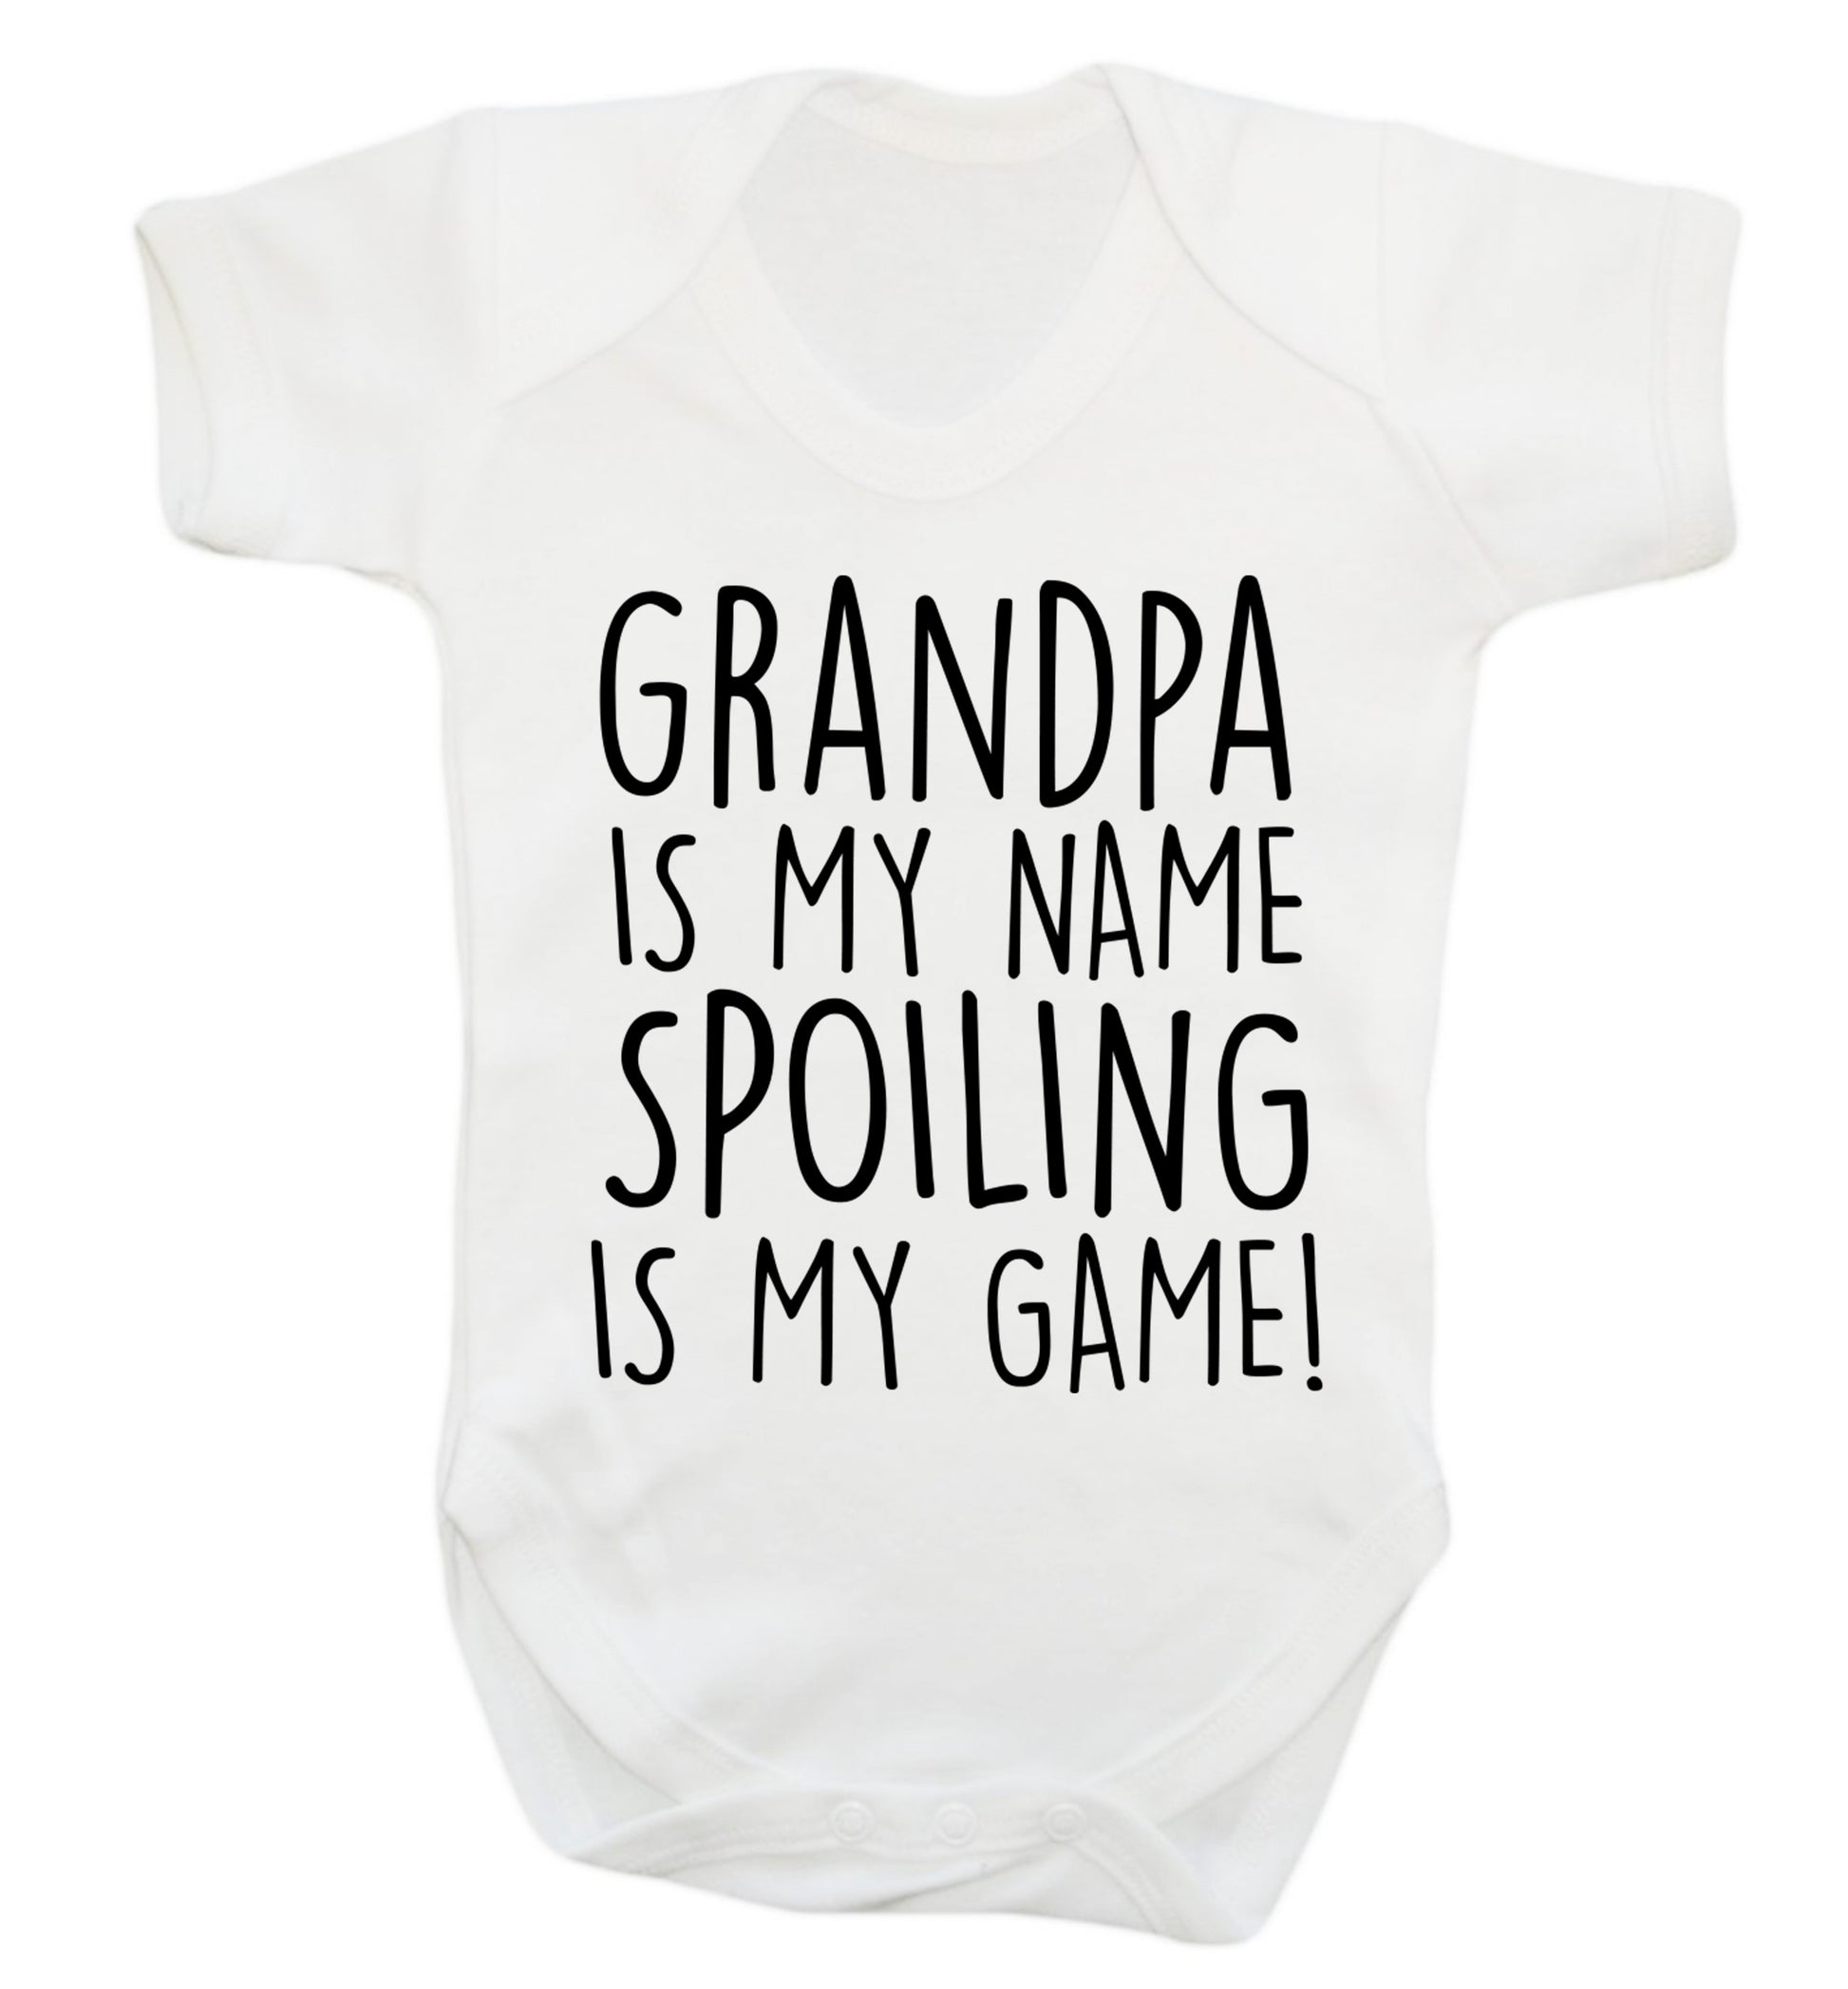 Grandpa is my name, spoiling is my game Baby Vest white 18-24 months